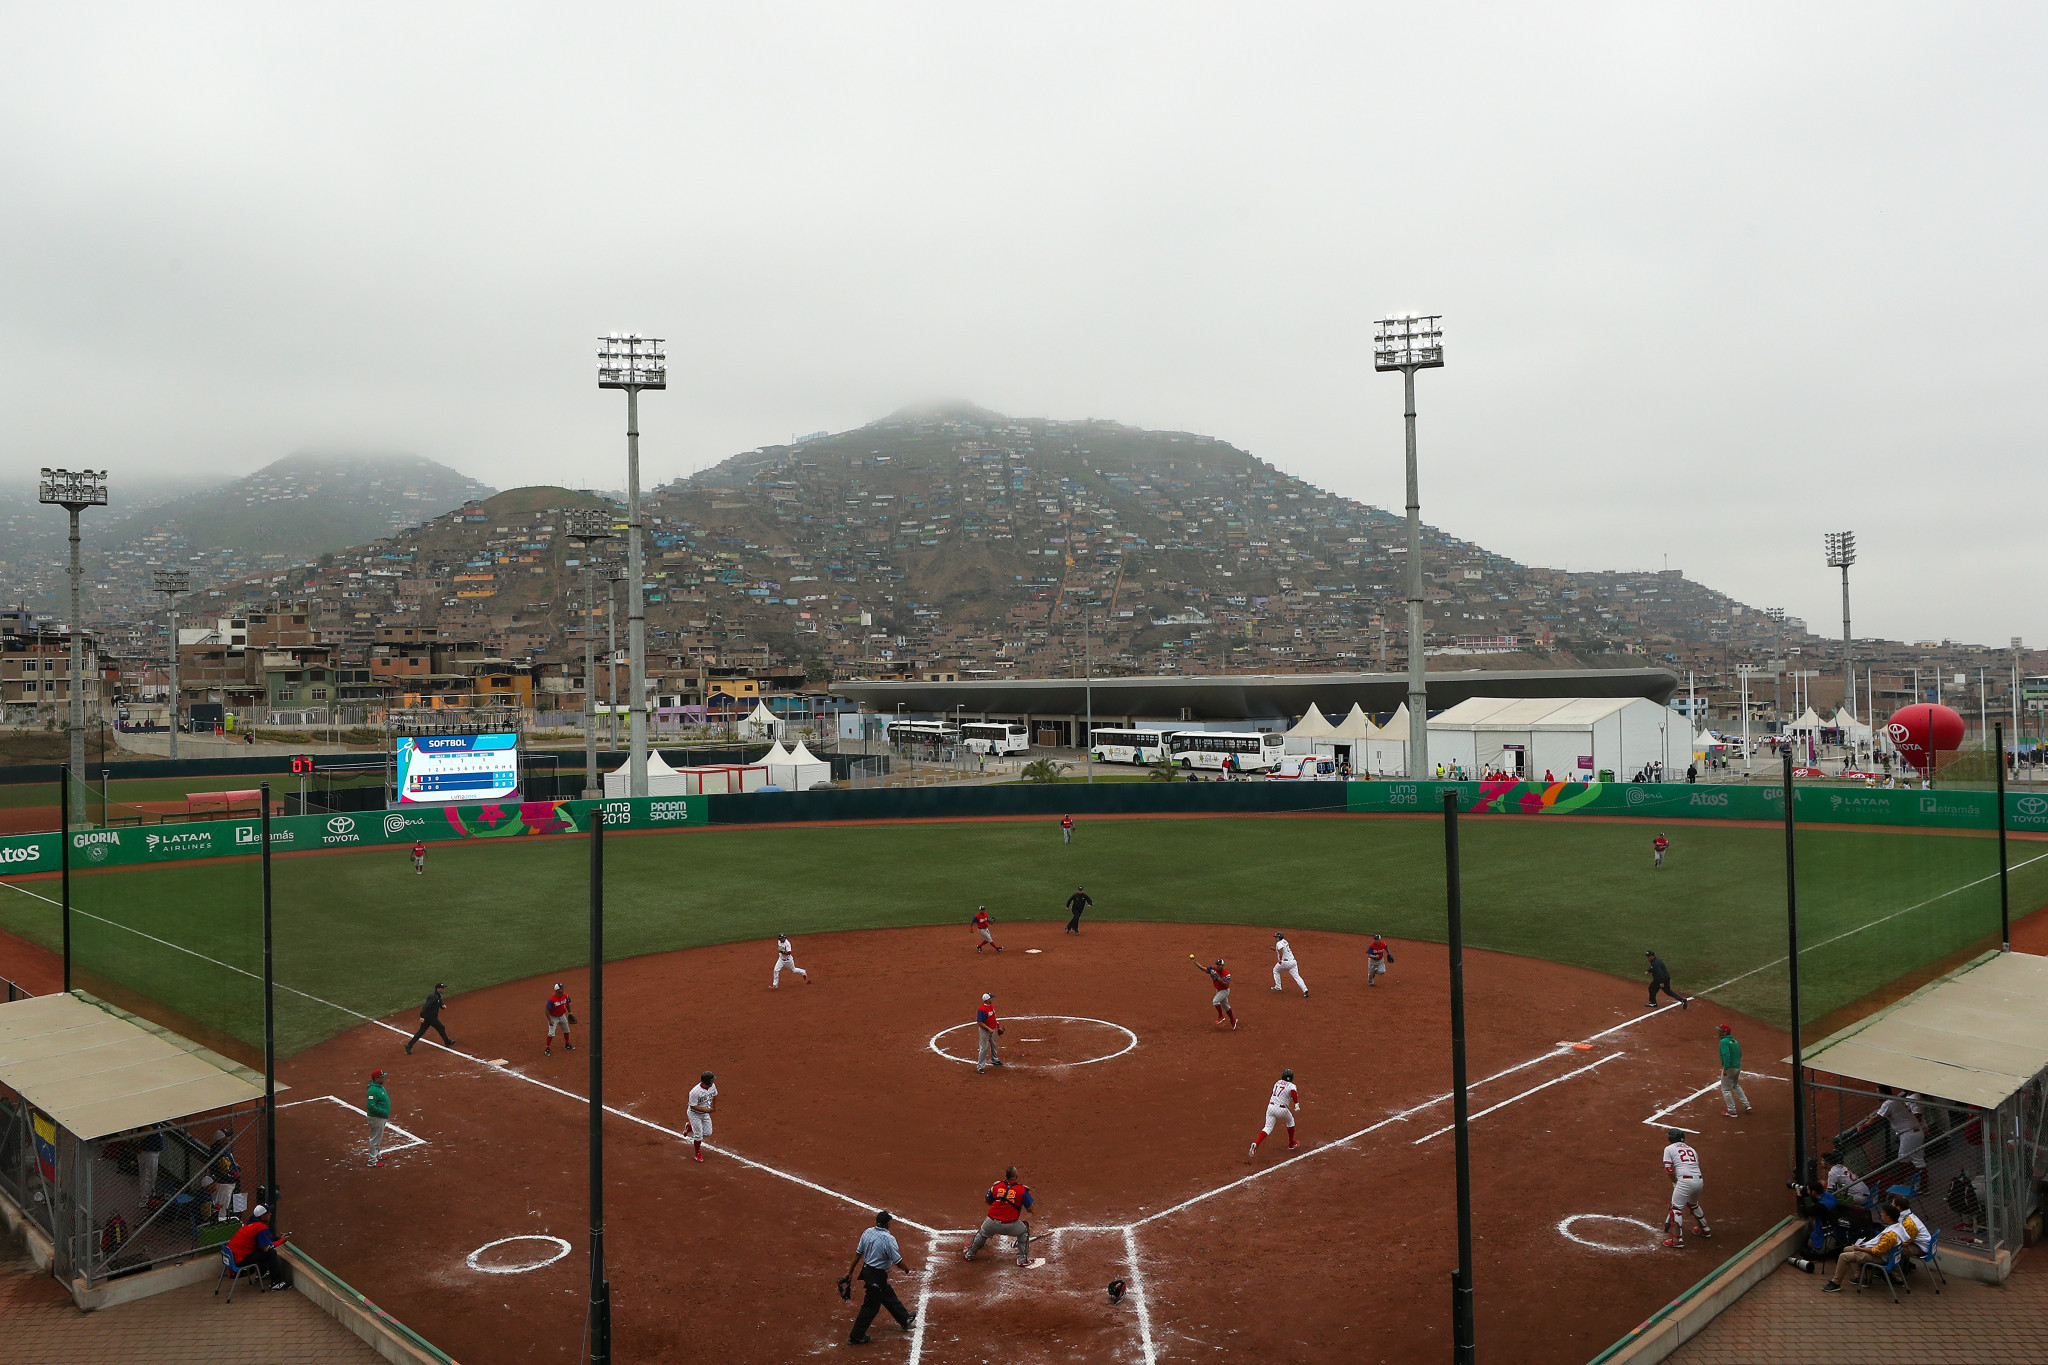 The Villa Maria del Triunfo Softball Stadium, which staged matches at the Lima 2019 Pan American Games, will be limited to 30 per cent of its capacity for the WBSC Under-18 Women's Softball World Cup ©Getty Images